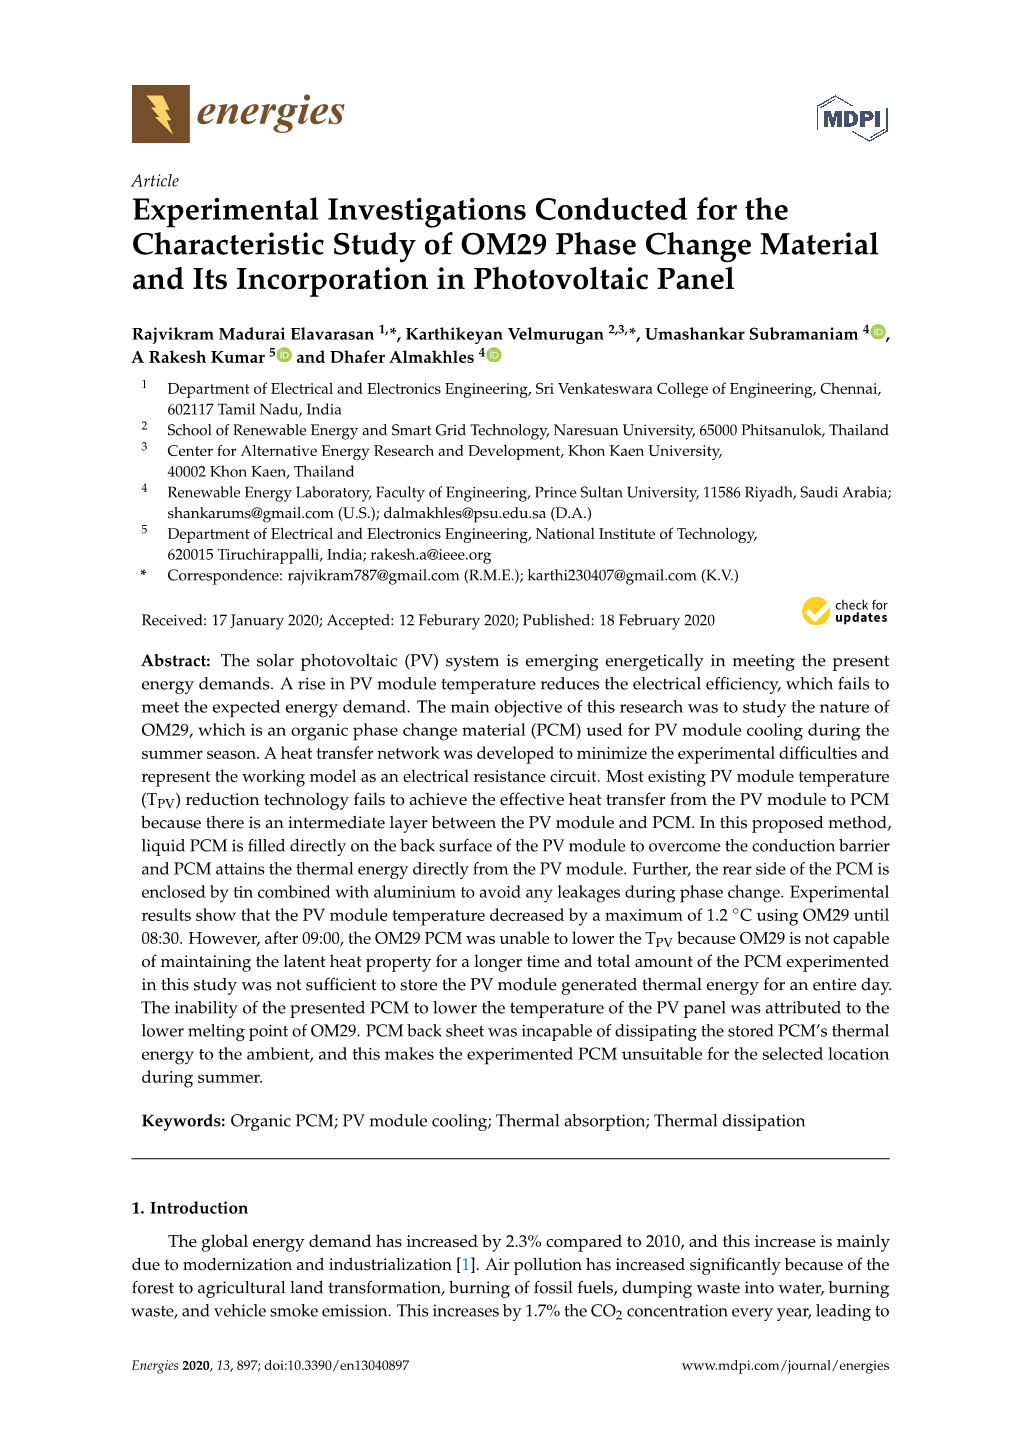 Experimental Investigations Conducted for the Characteristic Study of OM29 Phase Change Material and Its Incorporation in Photovoltaic Panel